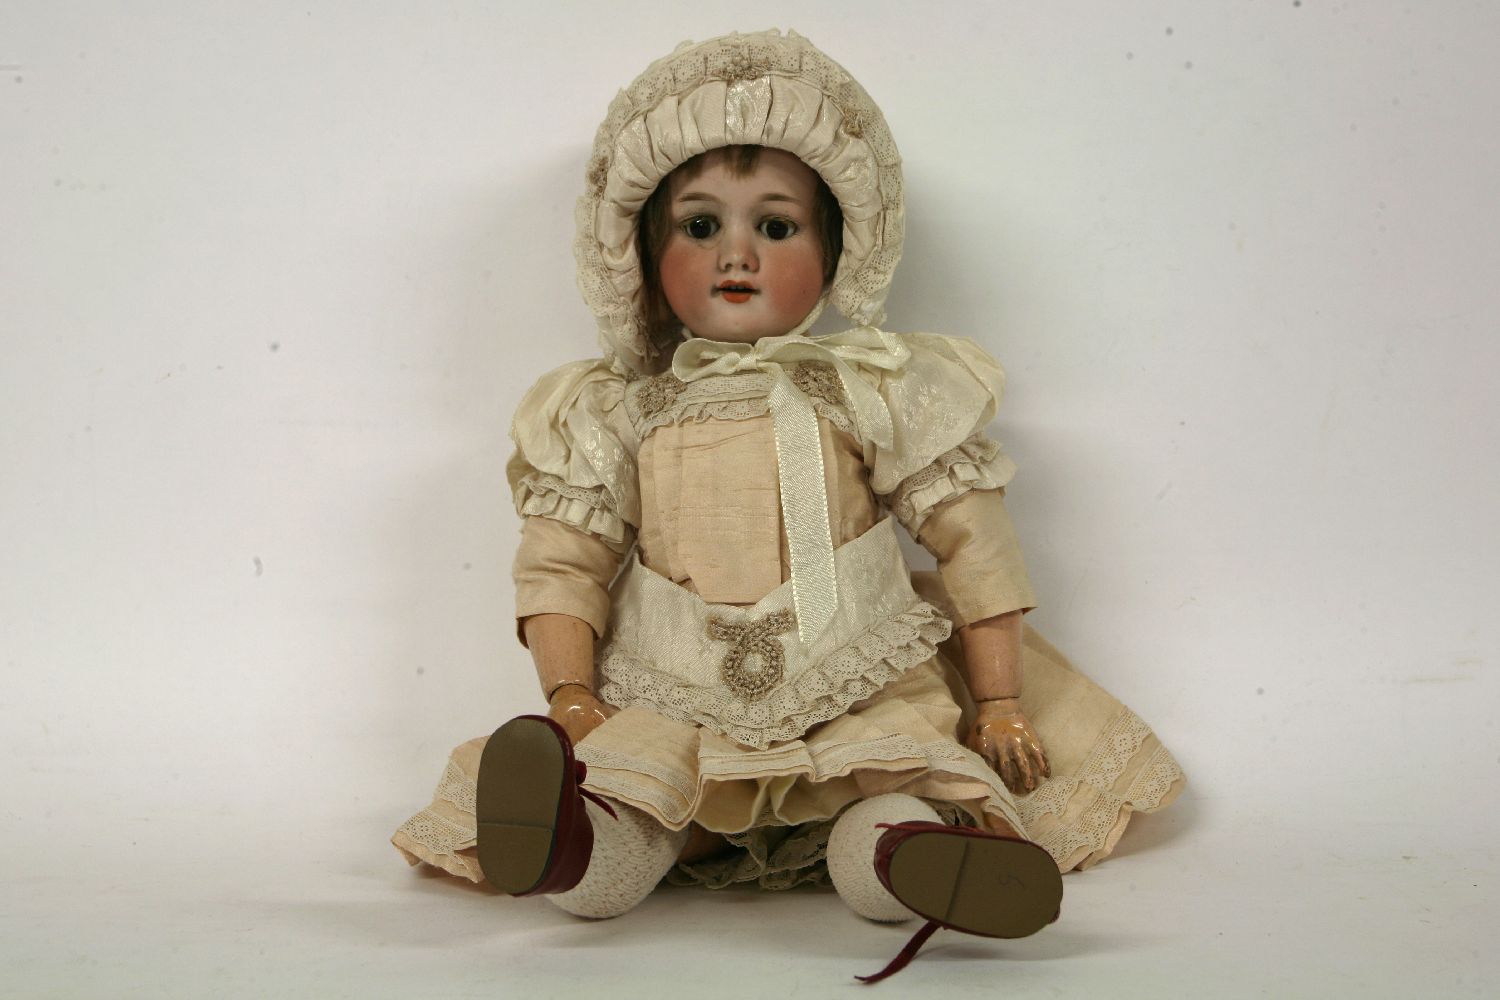 An Armand Marseille bisque head doll,with eyes/open/shut, mouth open, numbered 390 n. A.2.M, - Image 2 of 2